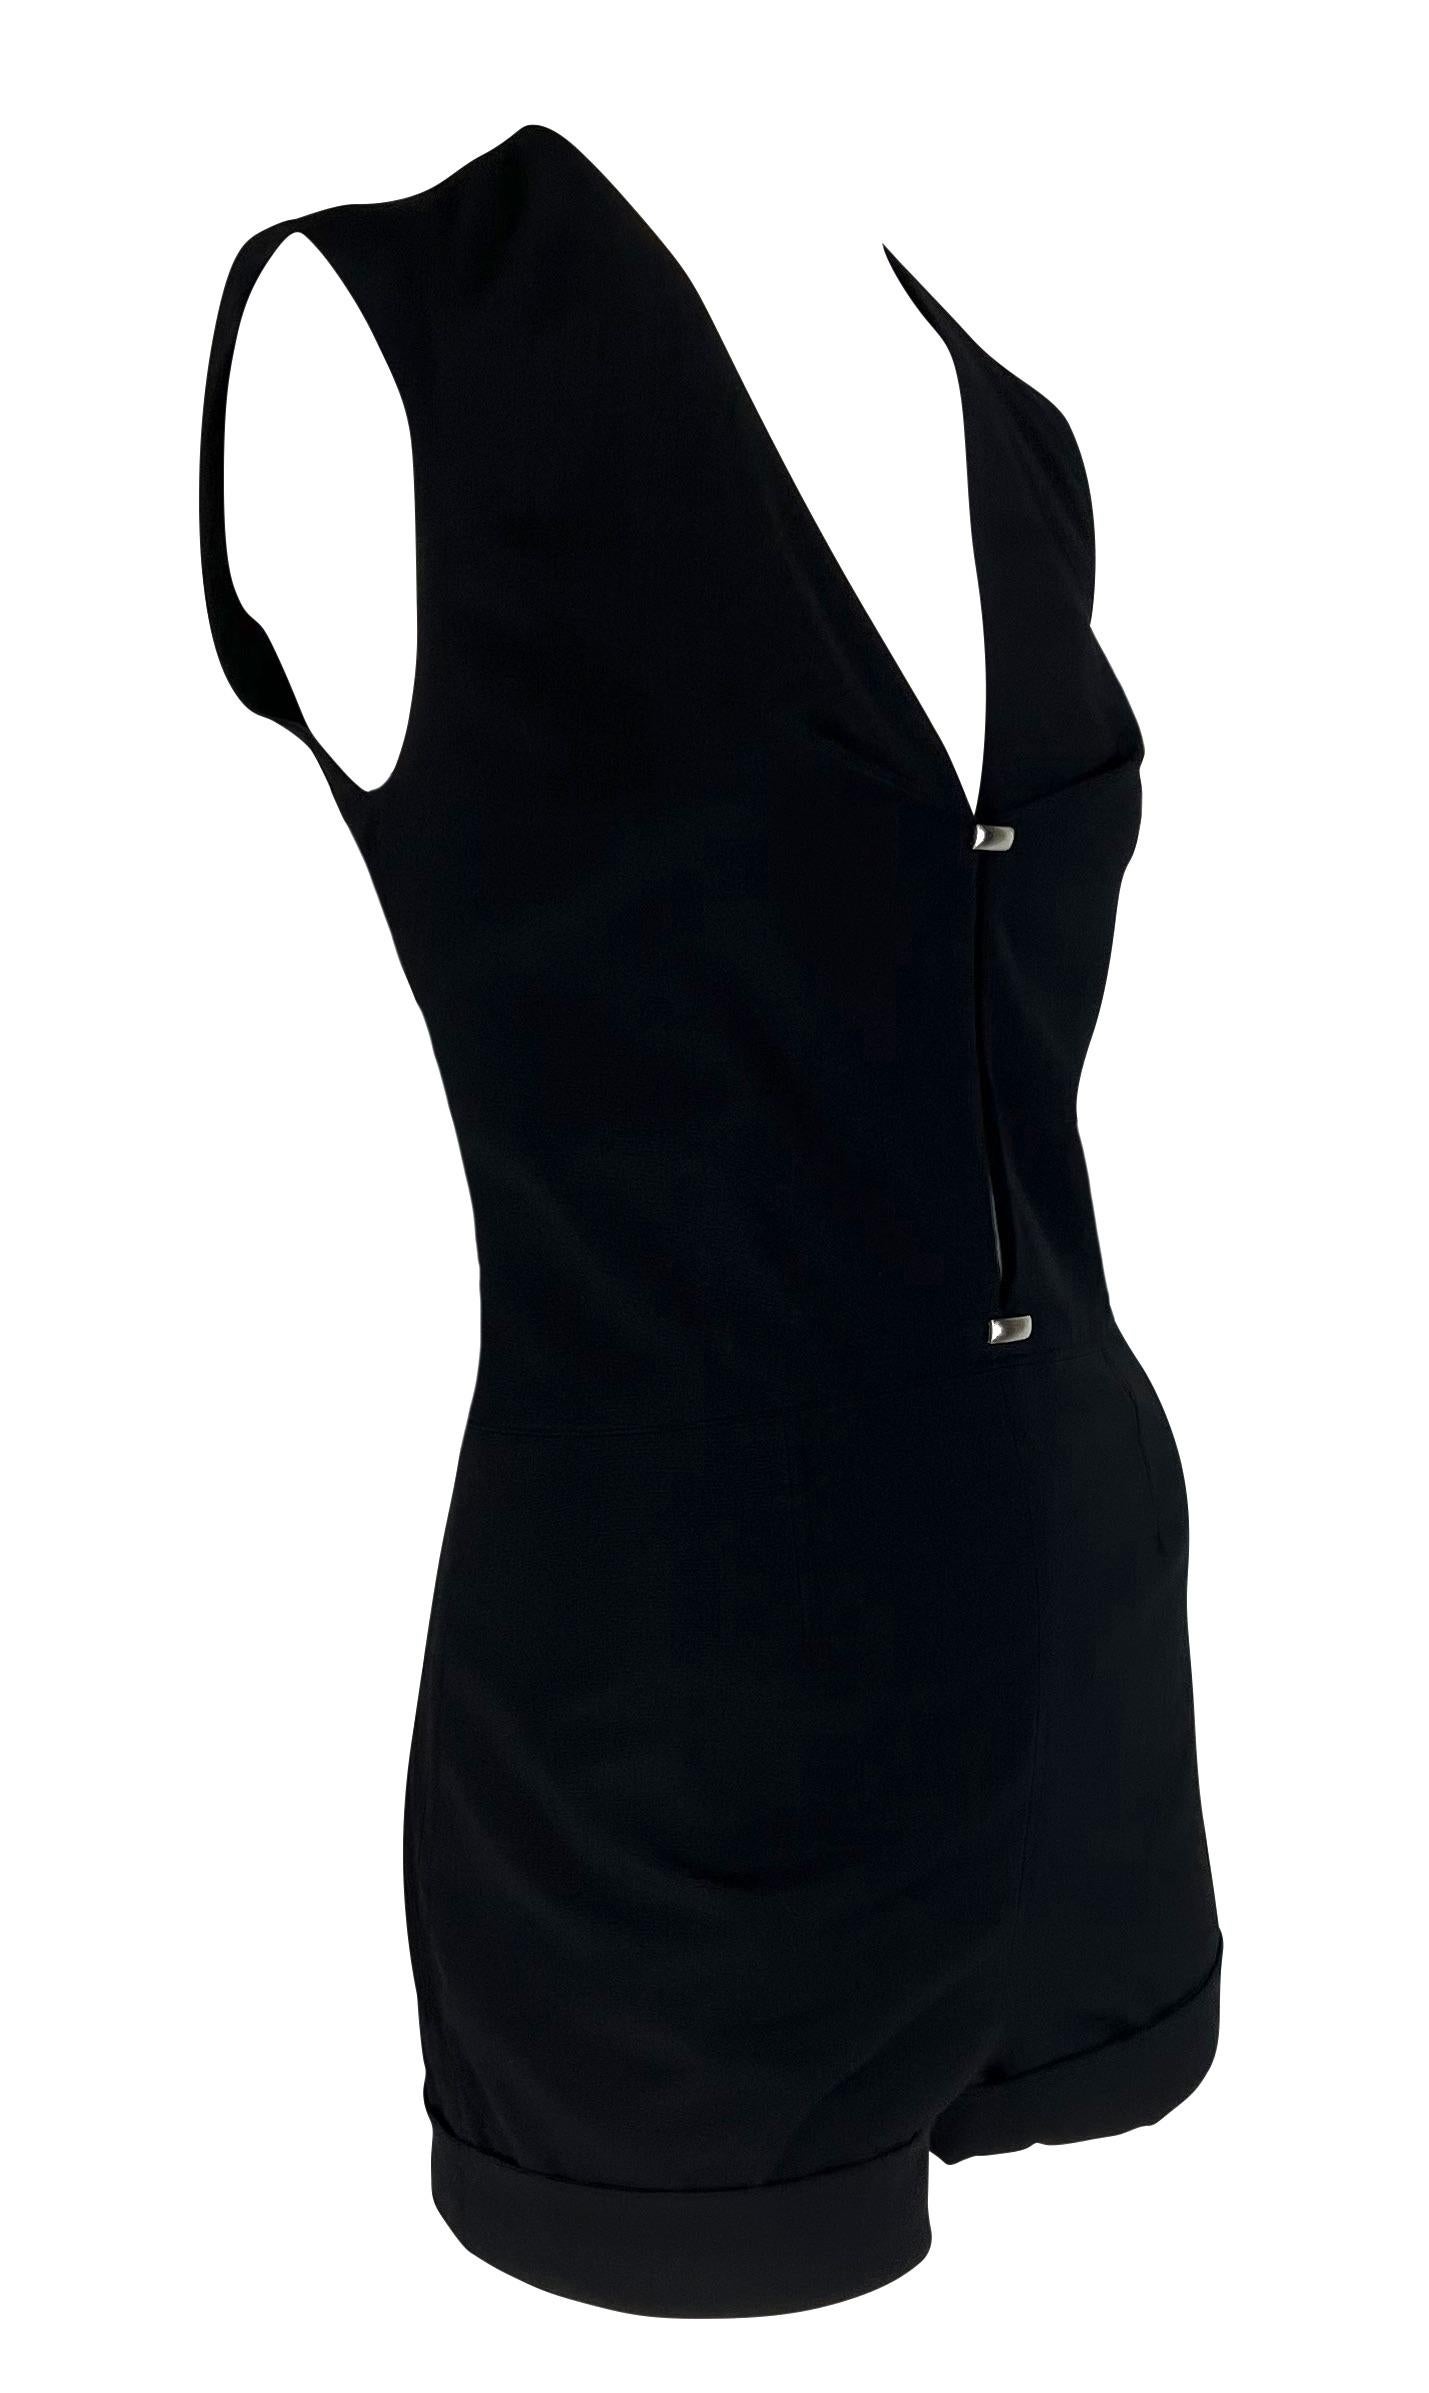 Presenting a black Thierry Mugler short romper, designed by Manfred Mugler. From the early 2000s, this short jumpsuit features short sleeves and a deep v-neckline. Silver-tone metal accents are scattered throughout the piece and connect eyelet